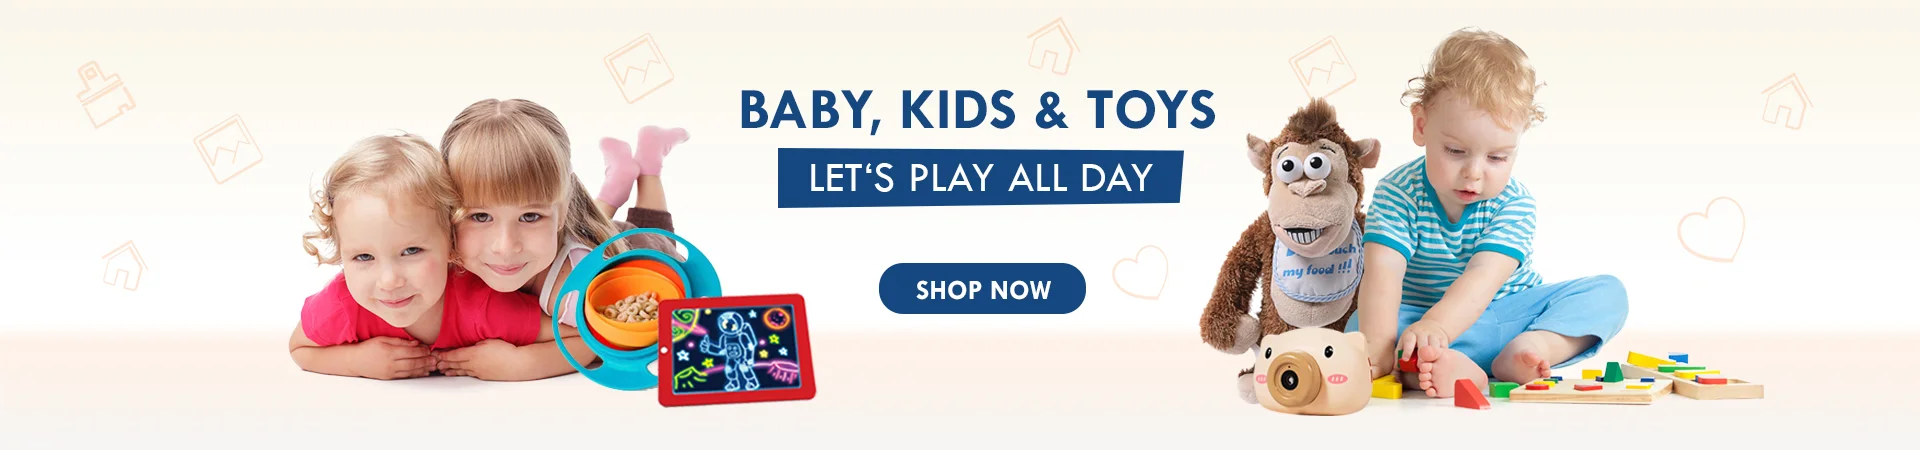 Baby Kids and Toys banner